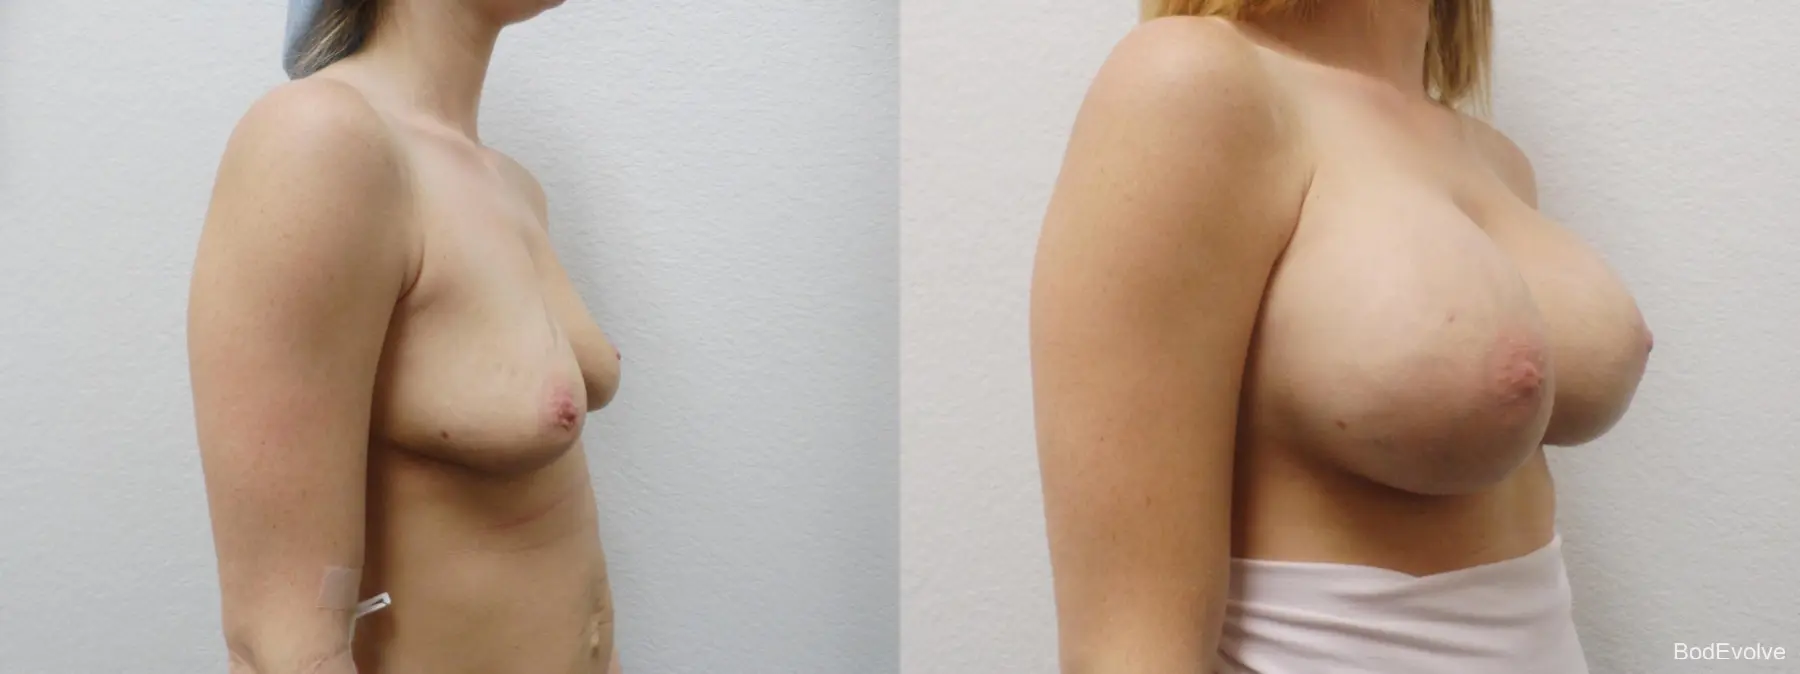 Breast Augmentation: Patient 3 - Before and After 4